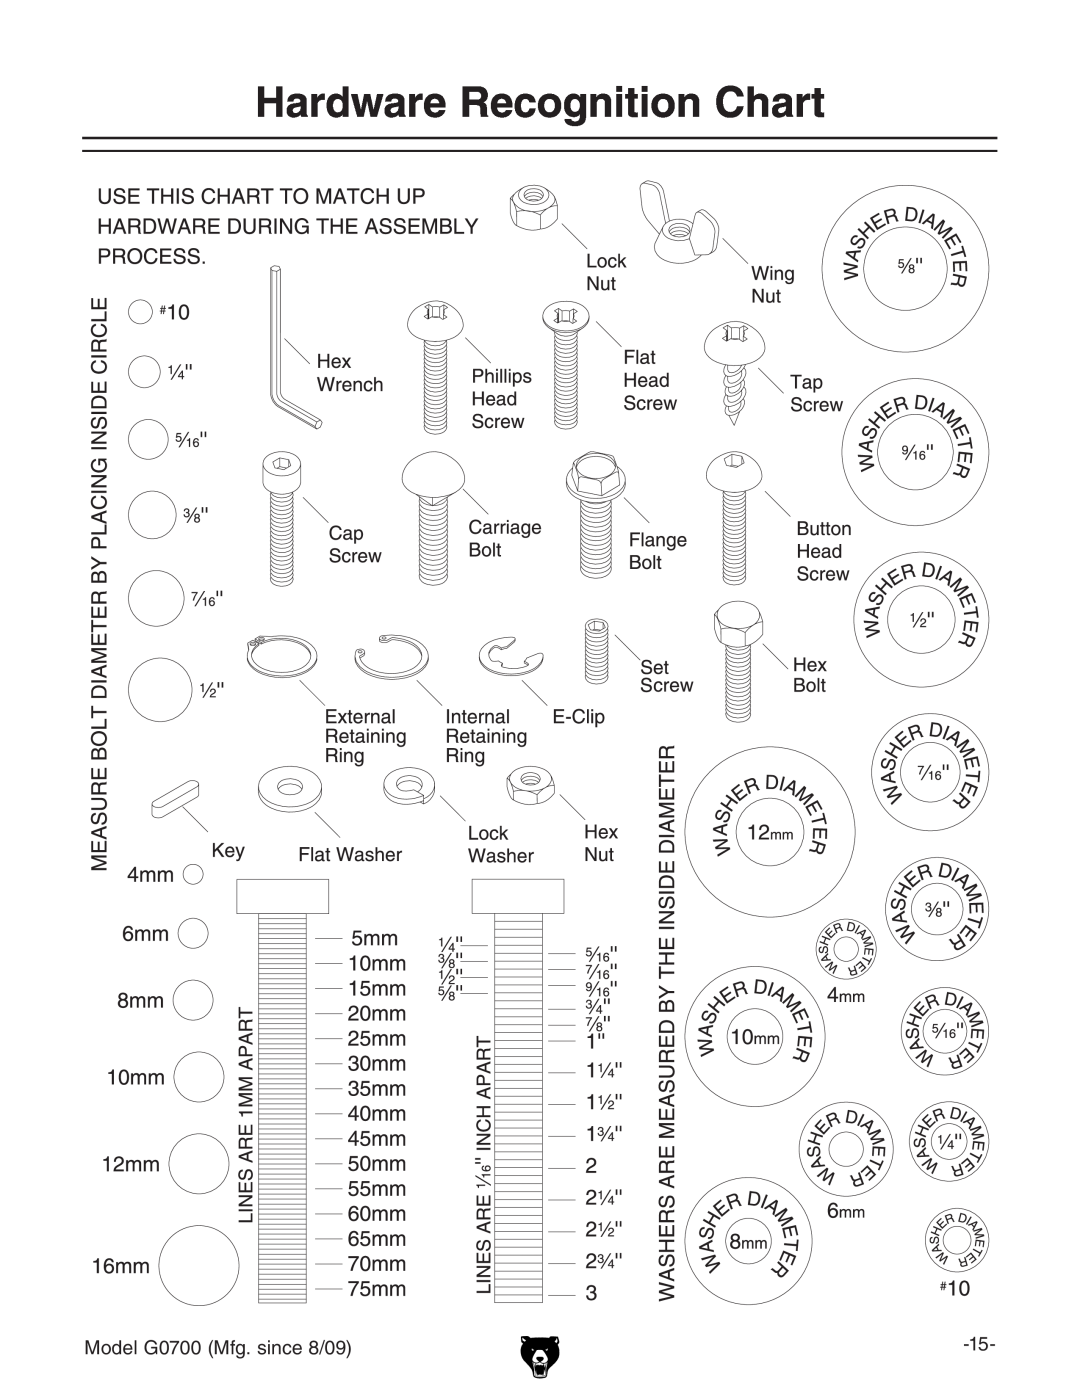 Grizzly owner manual Hardware Recognition Chart, Model G0700 Mfg. since 8/09 